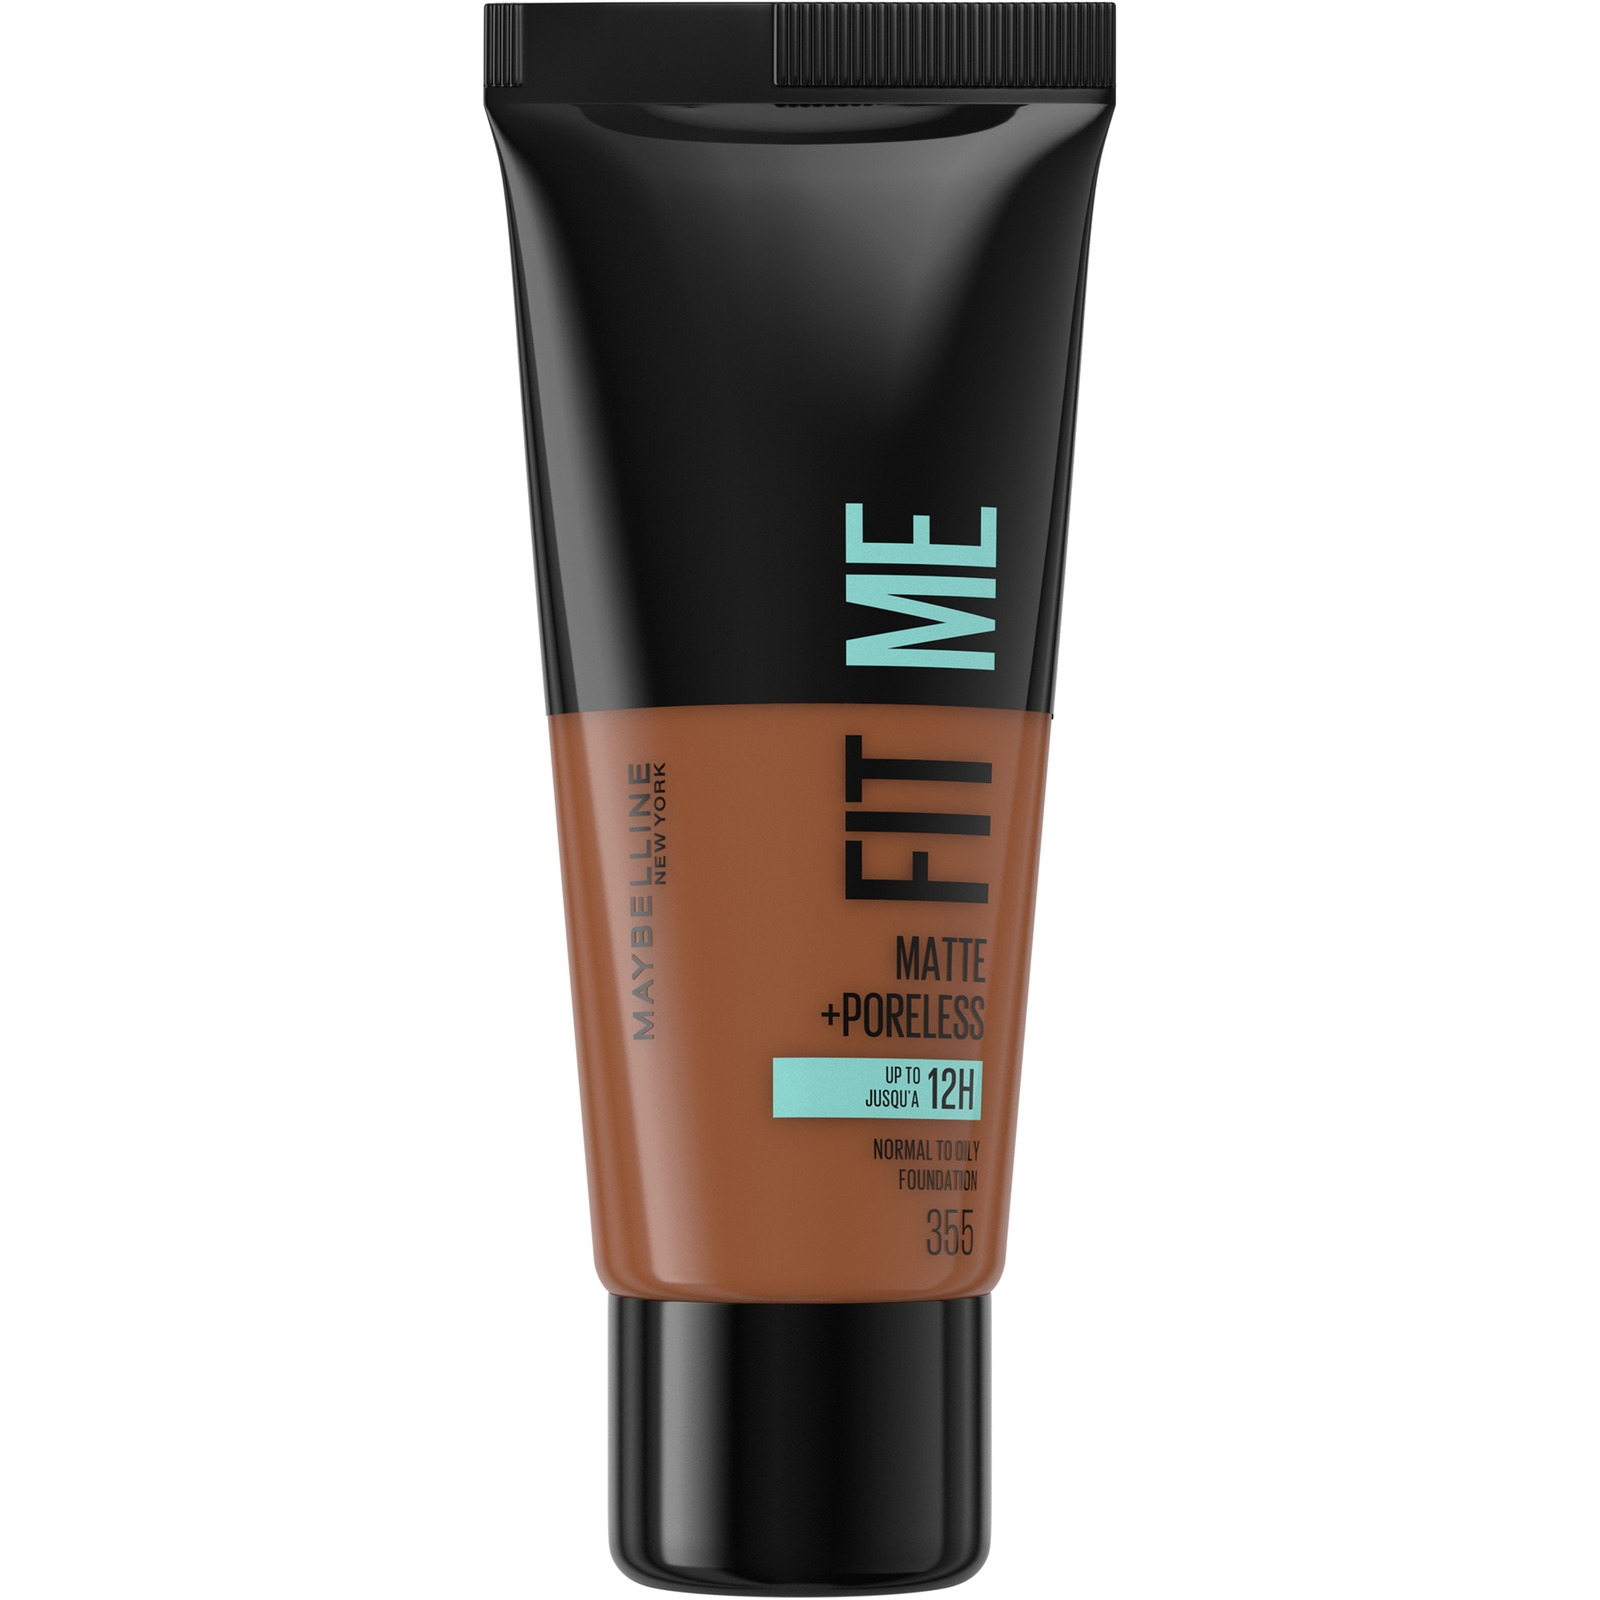 Maybelline Fit Me! Matte and Poreless Foundation 30ml (Various Shades) - 355 Pecan